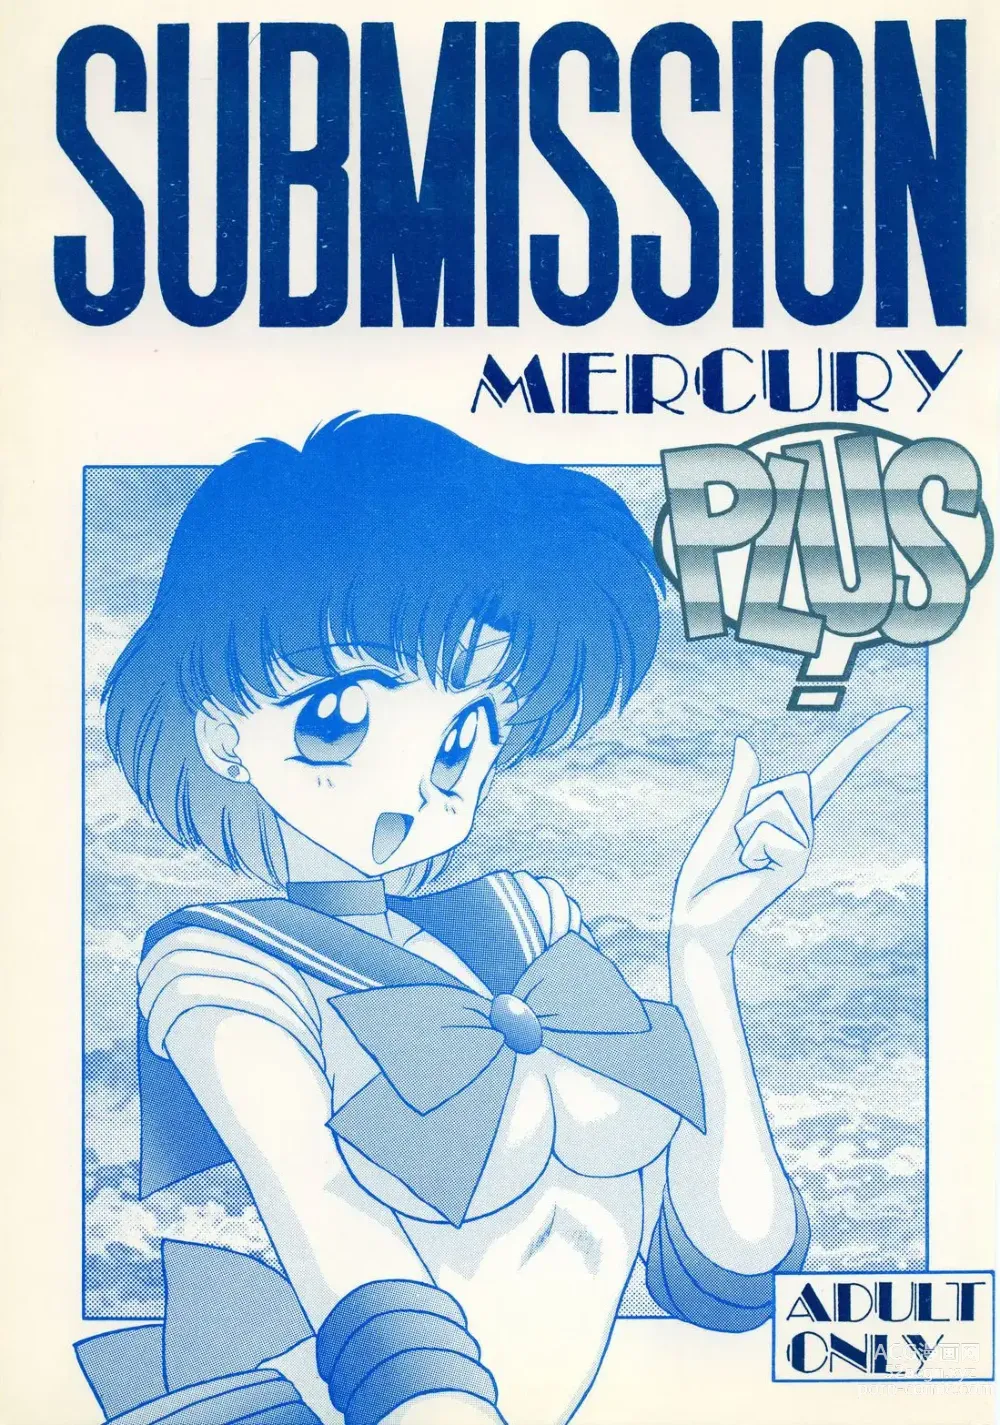 Page 1 of doujinshi Submission Mercury Plus